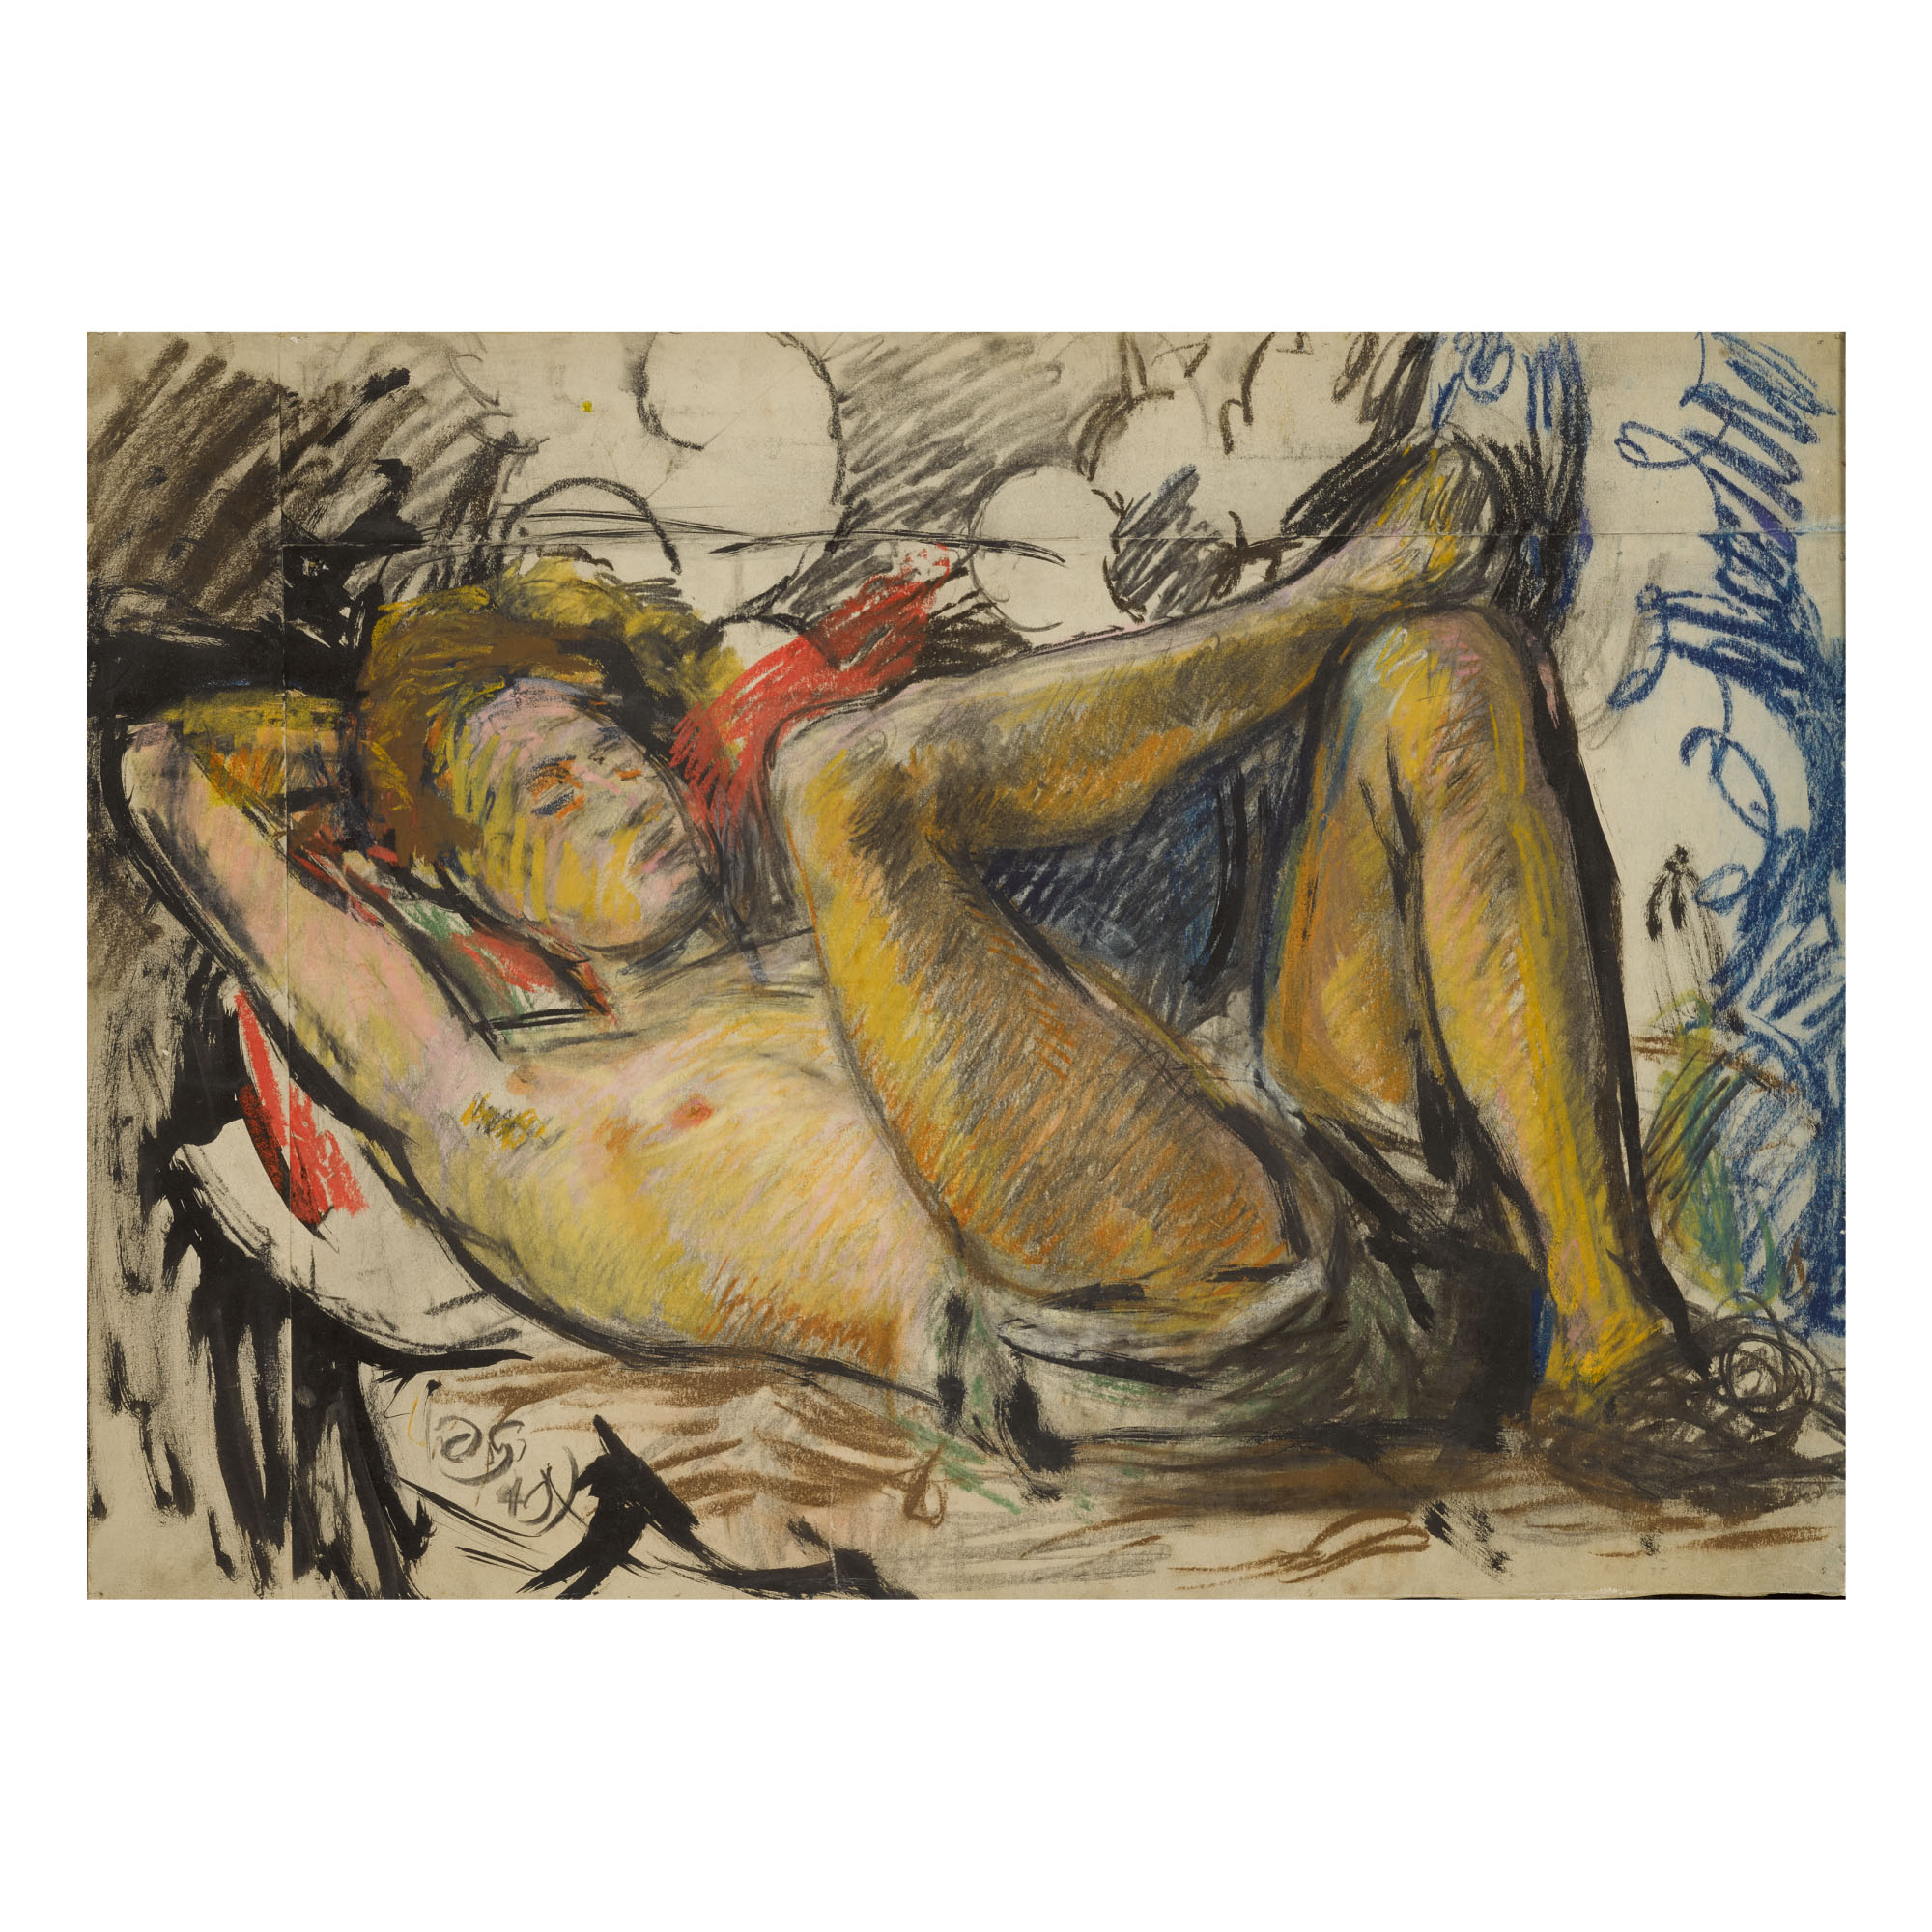 Paul Roche Reclining (c. 1947) by Duncan Grant. Image courtesy of Sotheby's